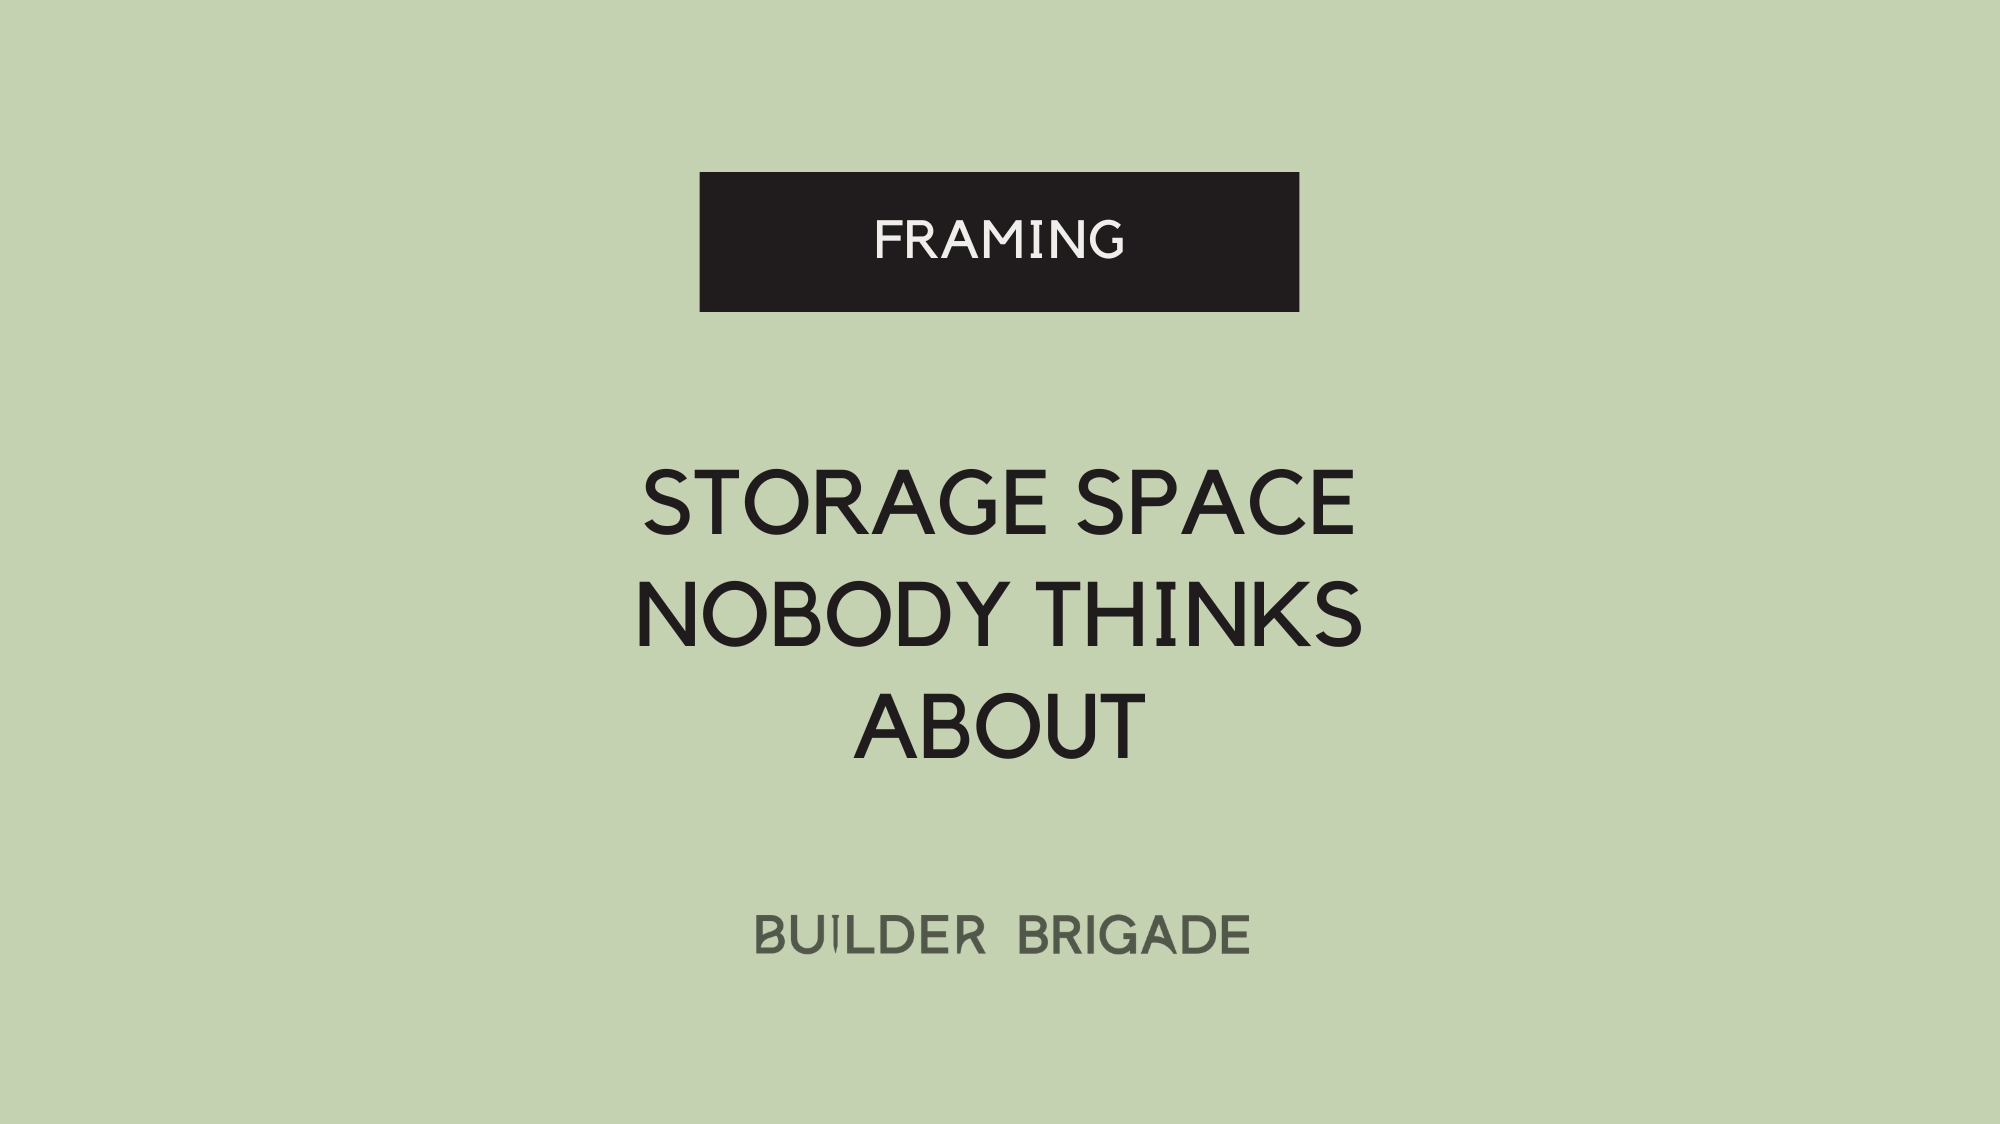 Storage space nobody thinks about